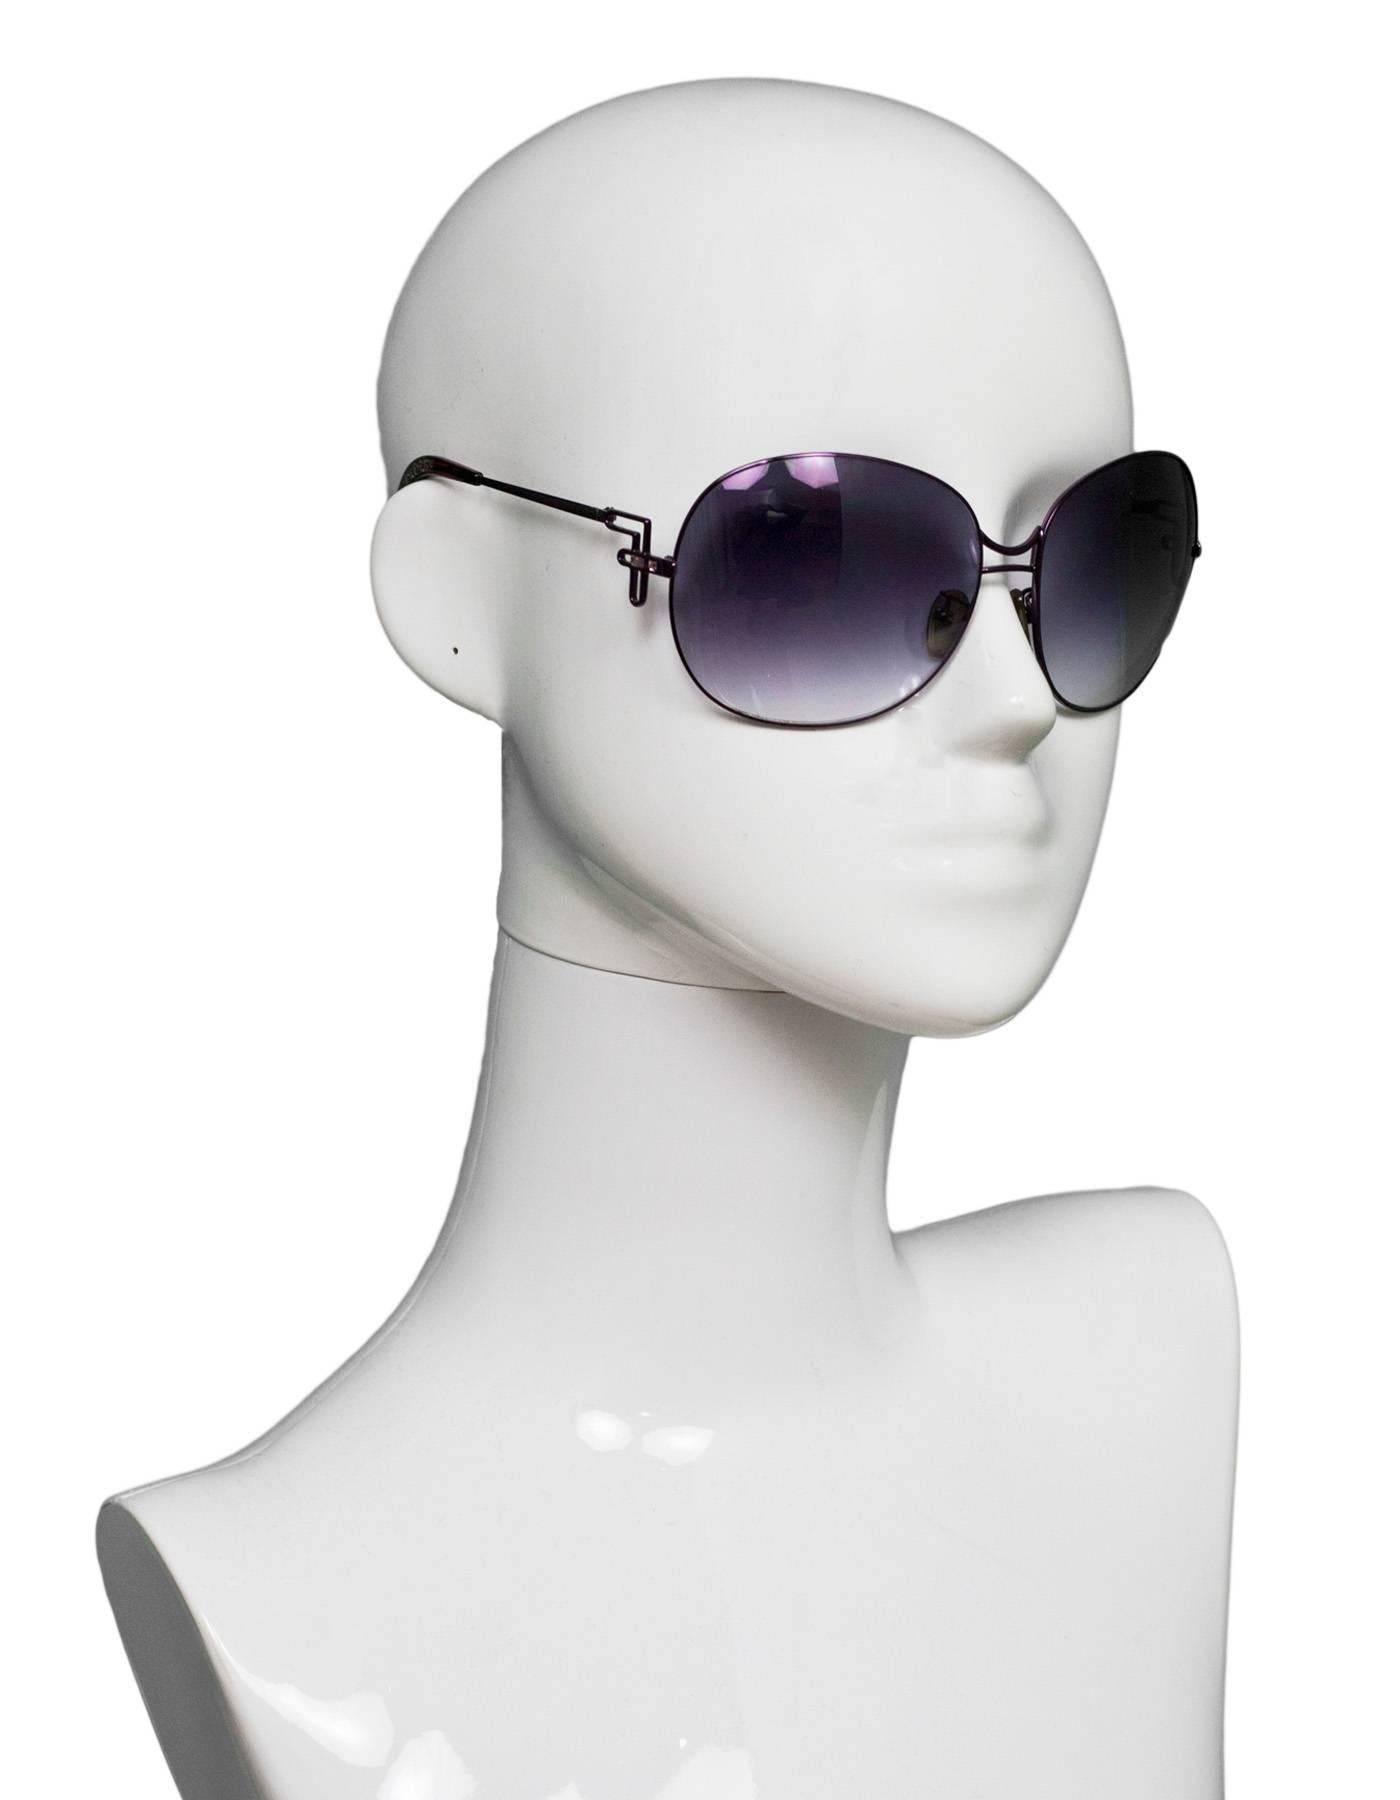 Fendi Purple Round Sunglasses

Made In: Italy
Color: Purple
Materials: Metal
Overall Condition: Excellent pre-owned condition, light surface marks
Included: Fendi case
Measurements: 
Across: 6"
Lens: 2.5"
Arm: 4.5"